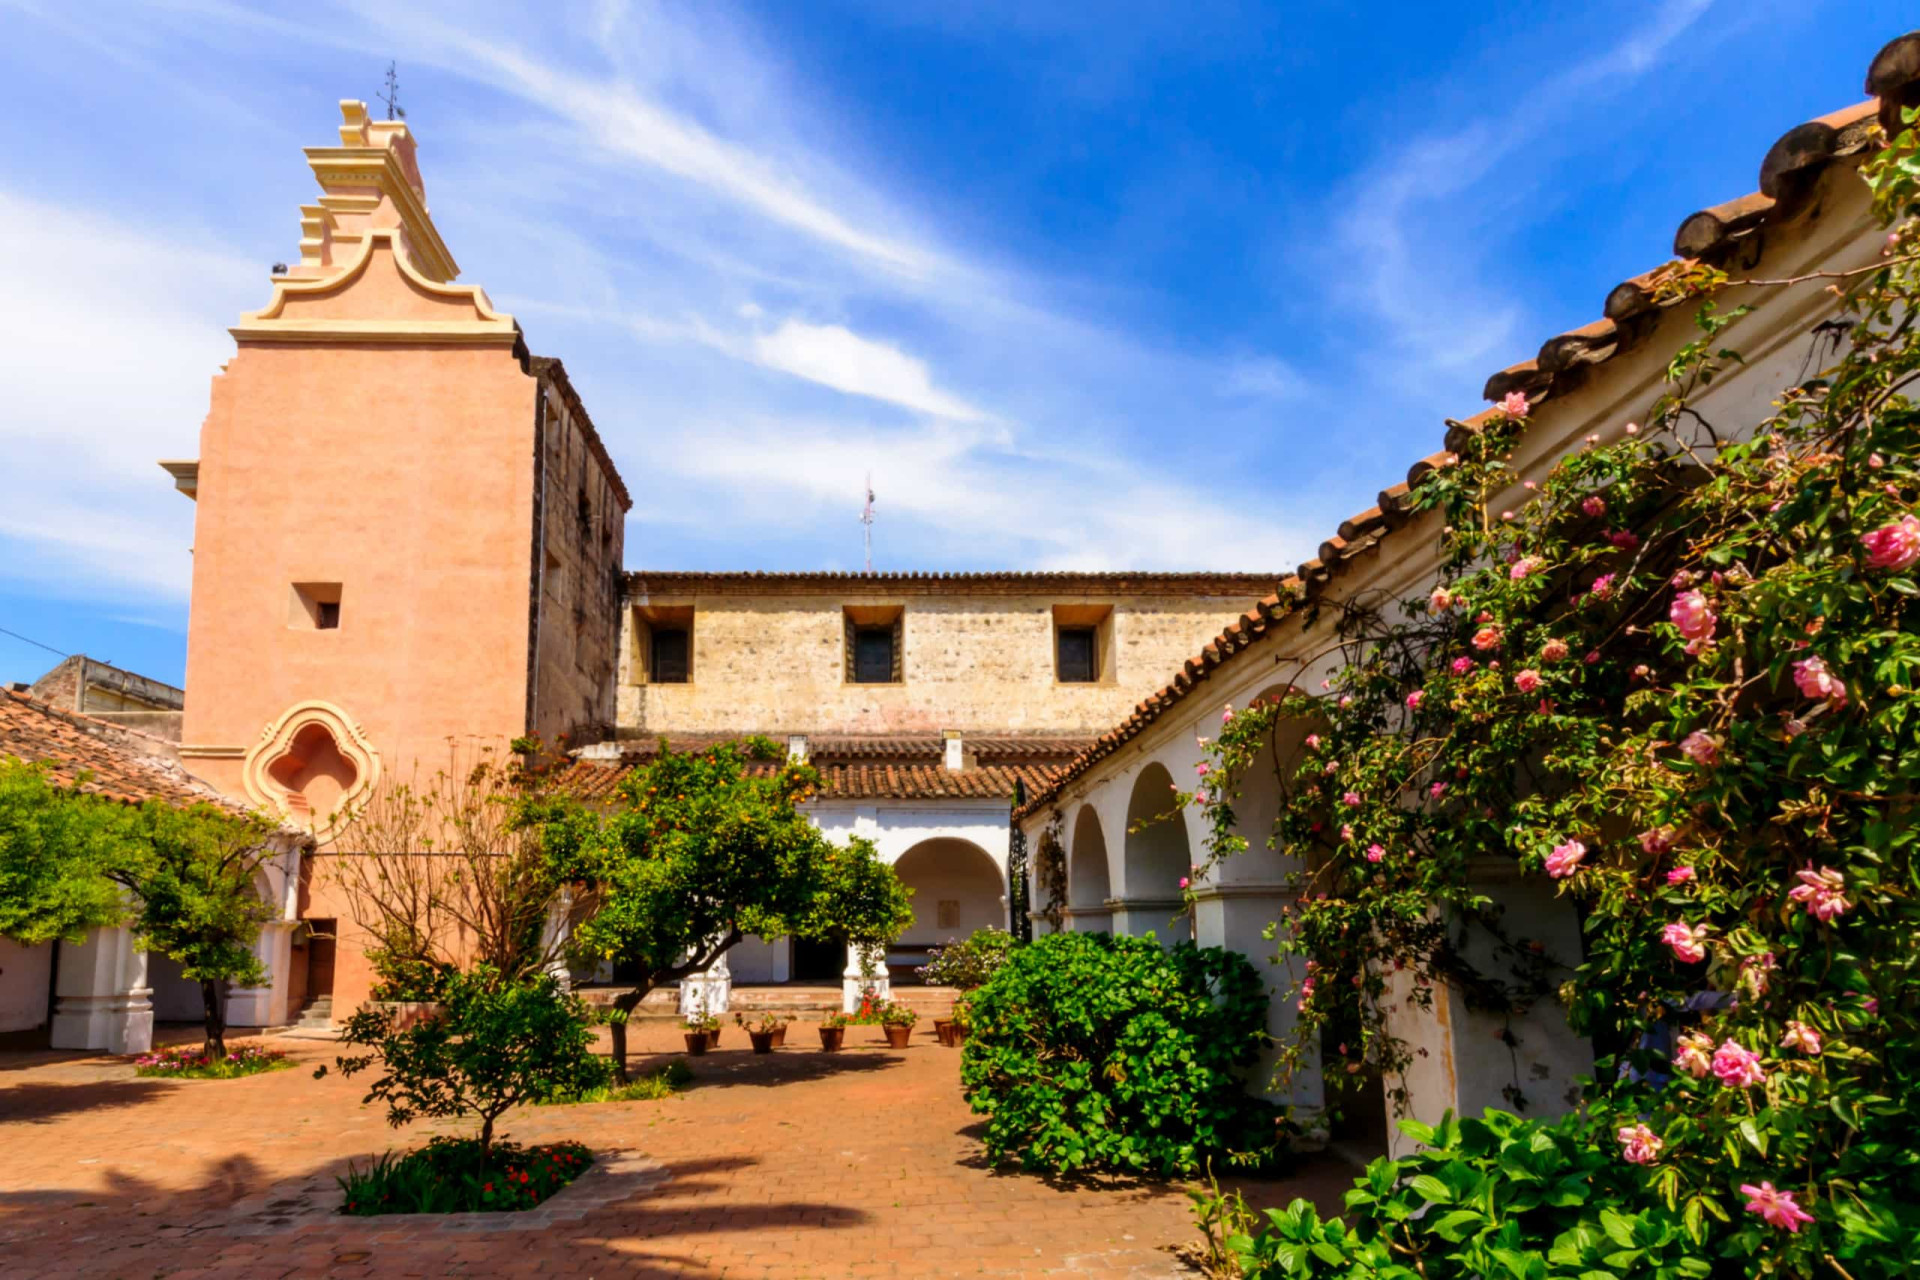 Location: Córdoba<br>Criteria: Cultural<br>Year established: 2000<br>Description: This former early 17th-century Jesuit settlement preserves a university (one of the oldest in South America), a church, residences, and five farming estates (<em>estancias</em>).<p>You may also like:<a href="https://www.starsinsider.com/n/465300?utm_source=msn.com&utm_medium=display&utm_campaign=referral_description&utm_content=413555v12en-us"> Creepy stories from people who work alone</a></p>